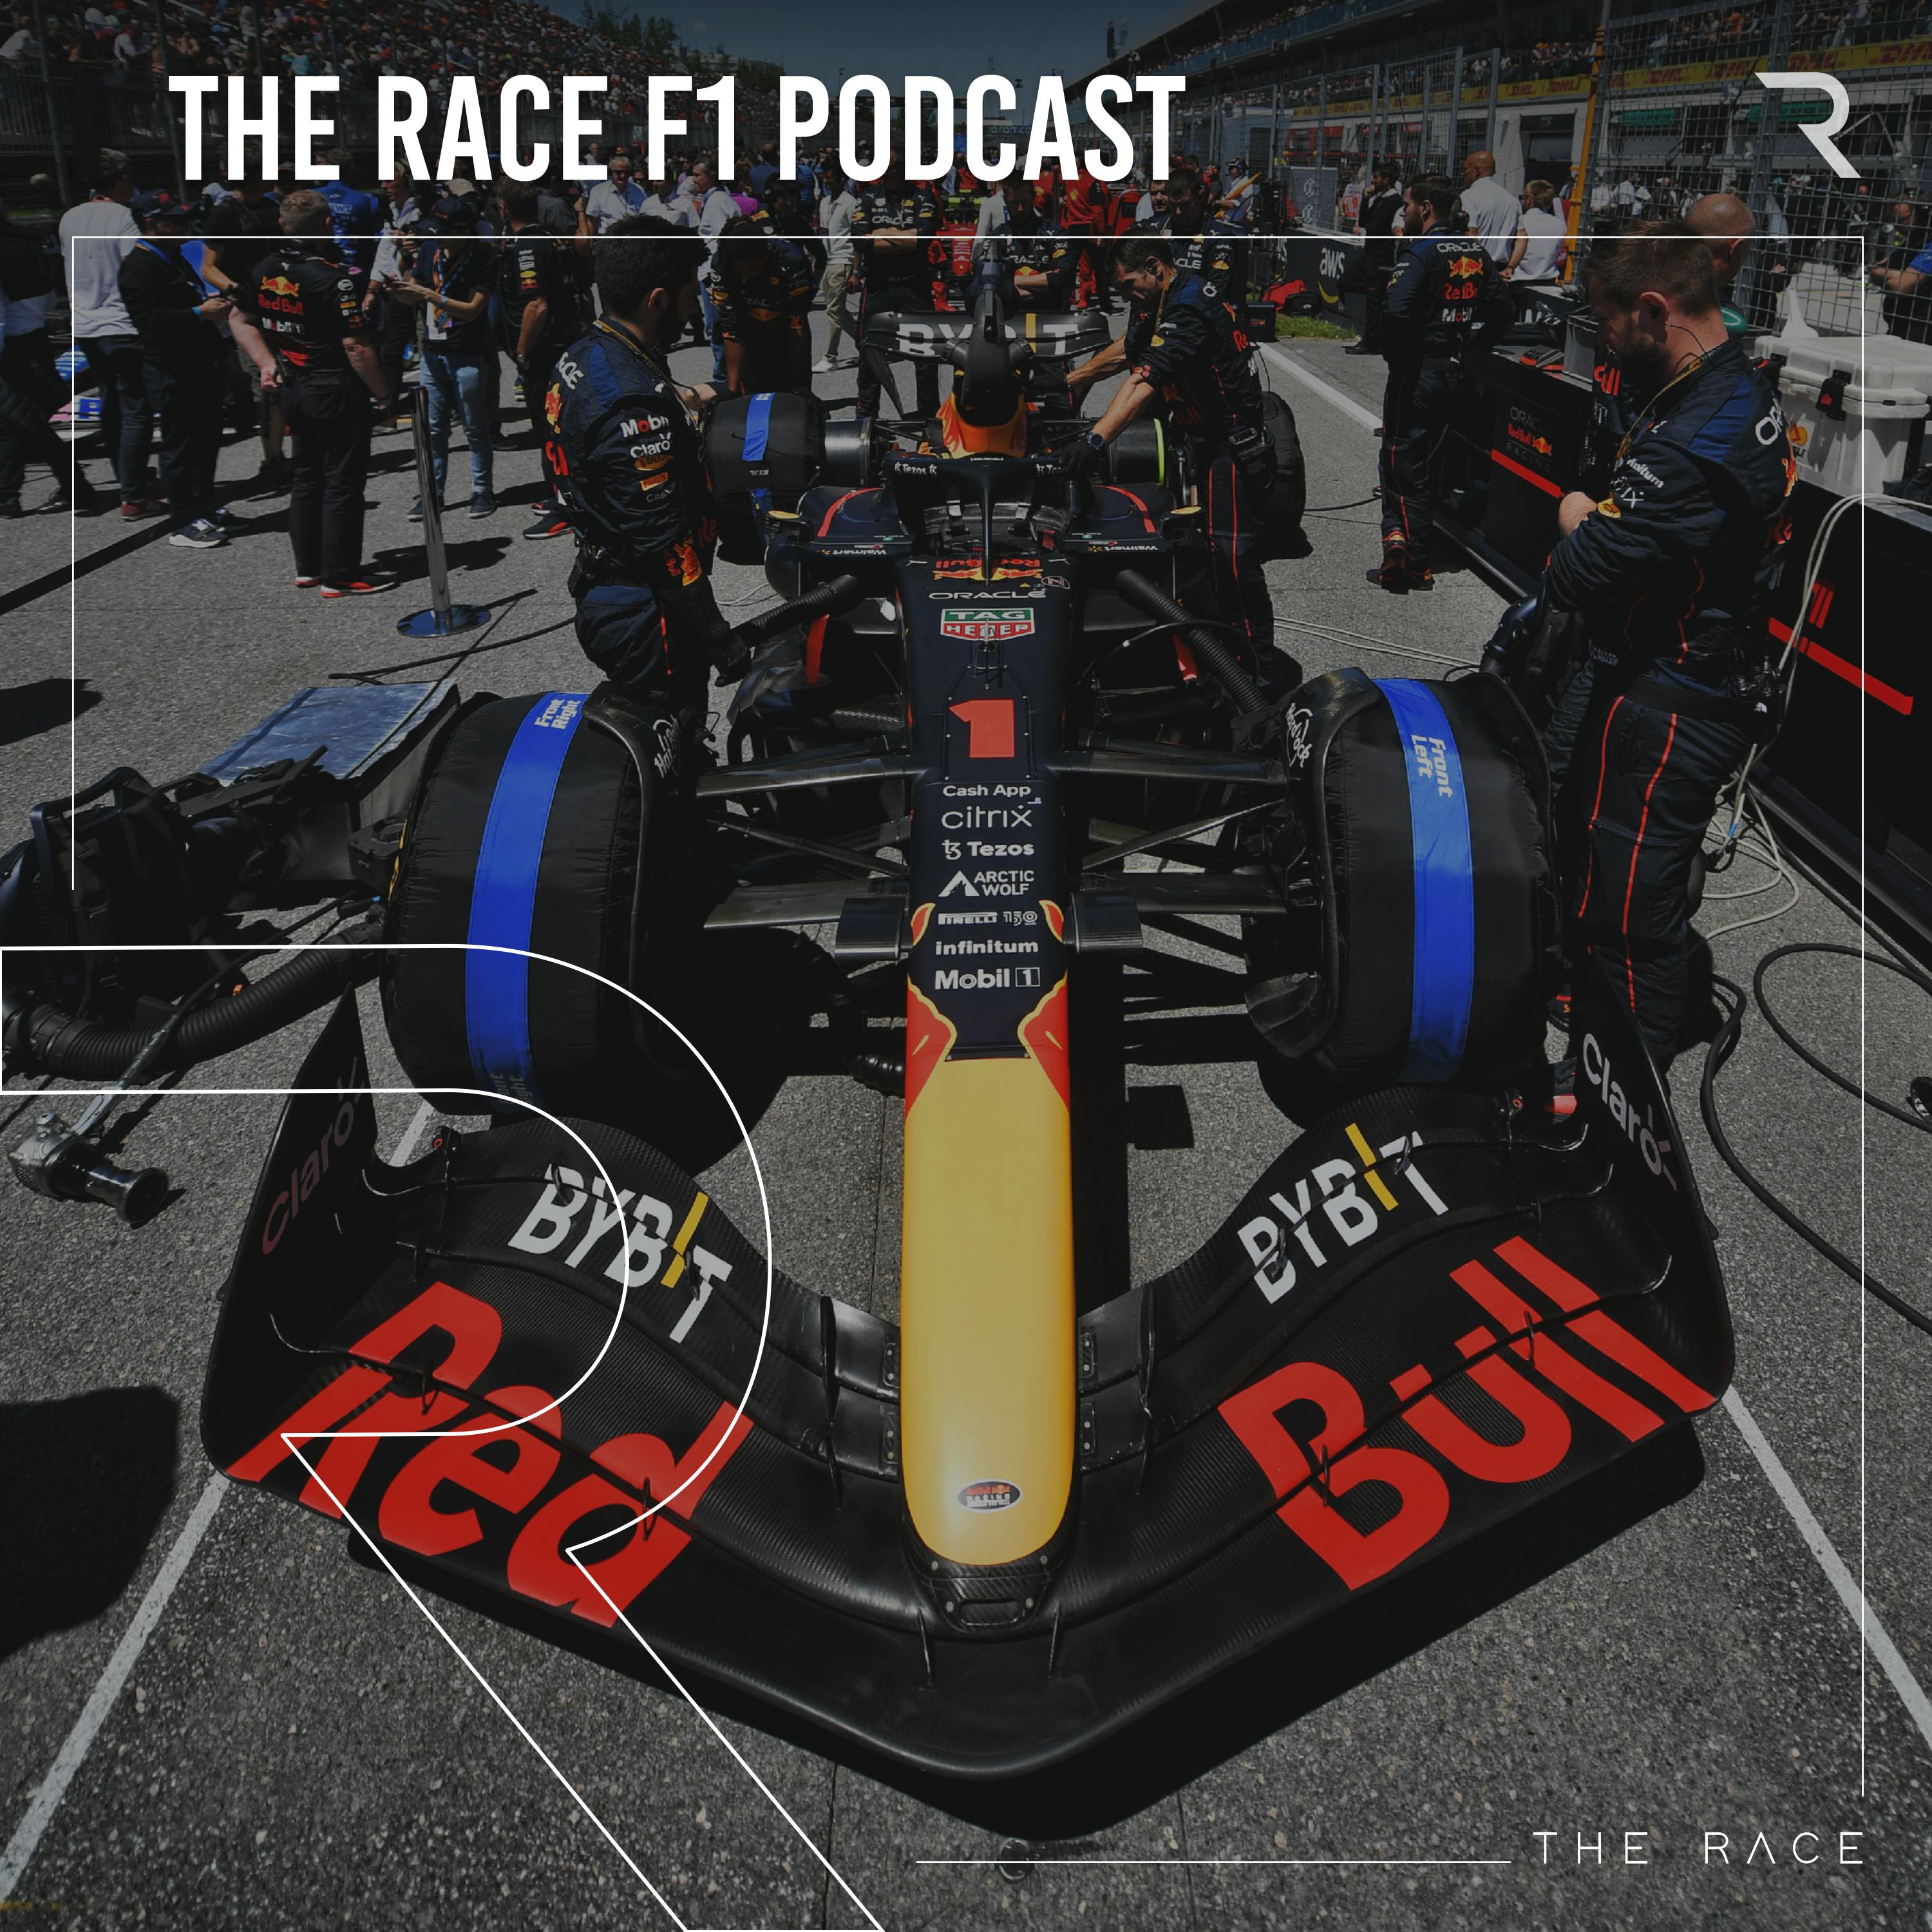 The battle over Red Bull's F1 cost cap breach